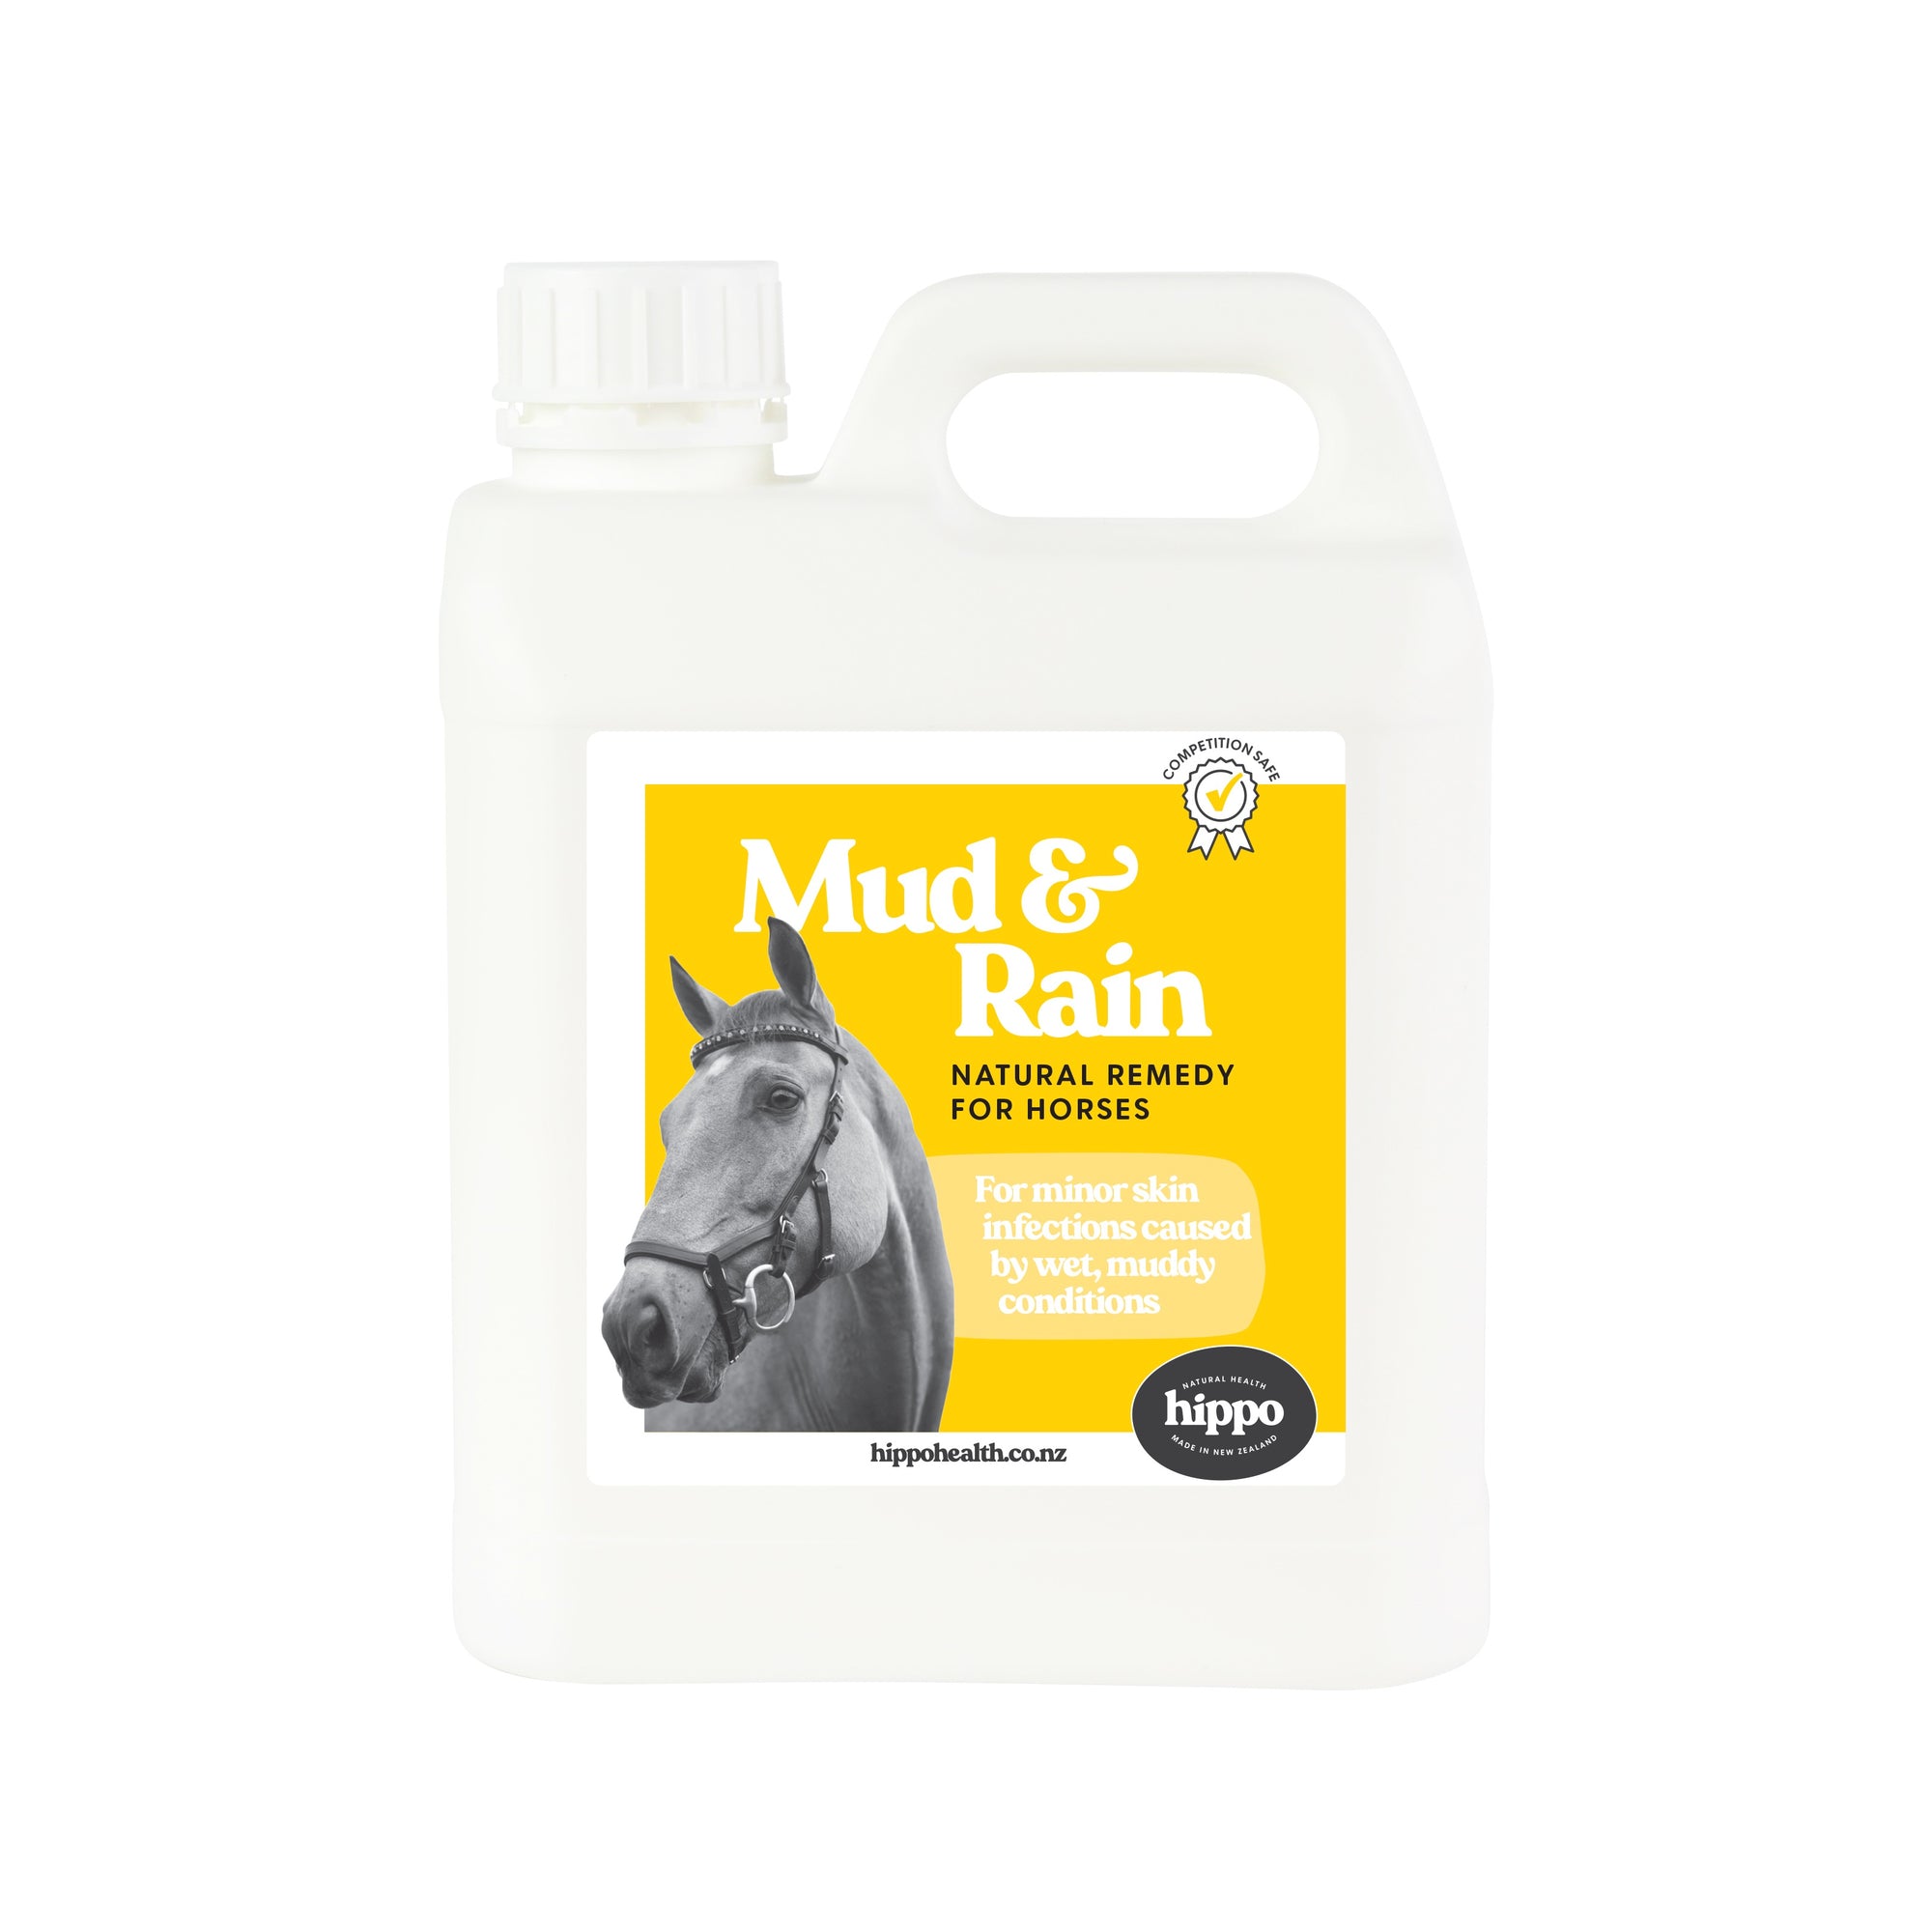 Mud & Rain for Horses (1L) is a ground-breaking natural supplement for horses can be used for greasy heel, mud fever or rain scald/rot.